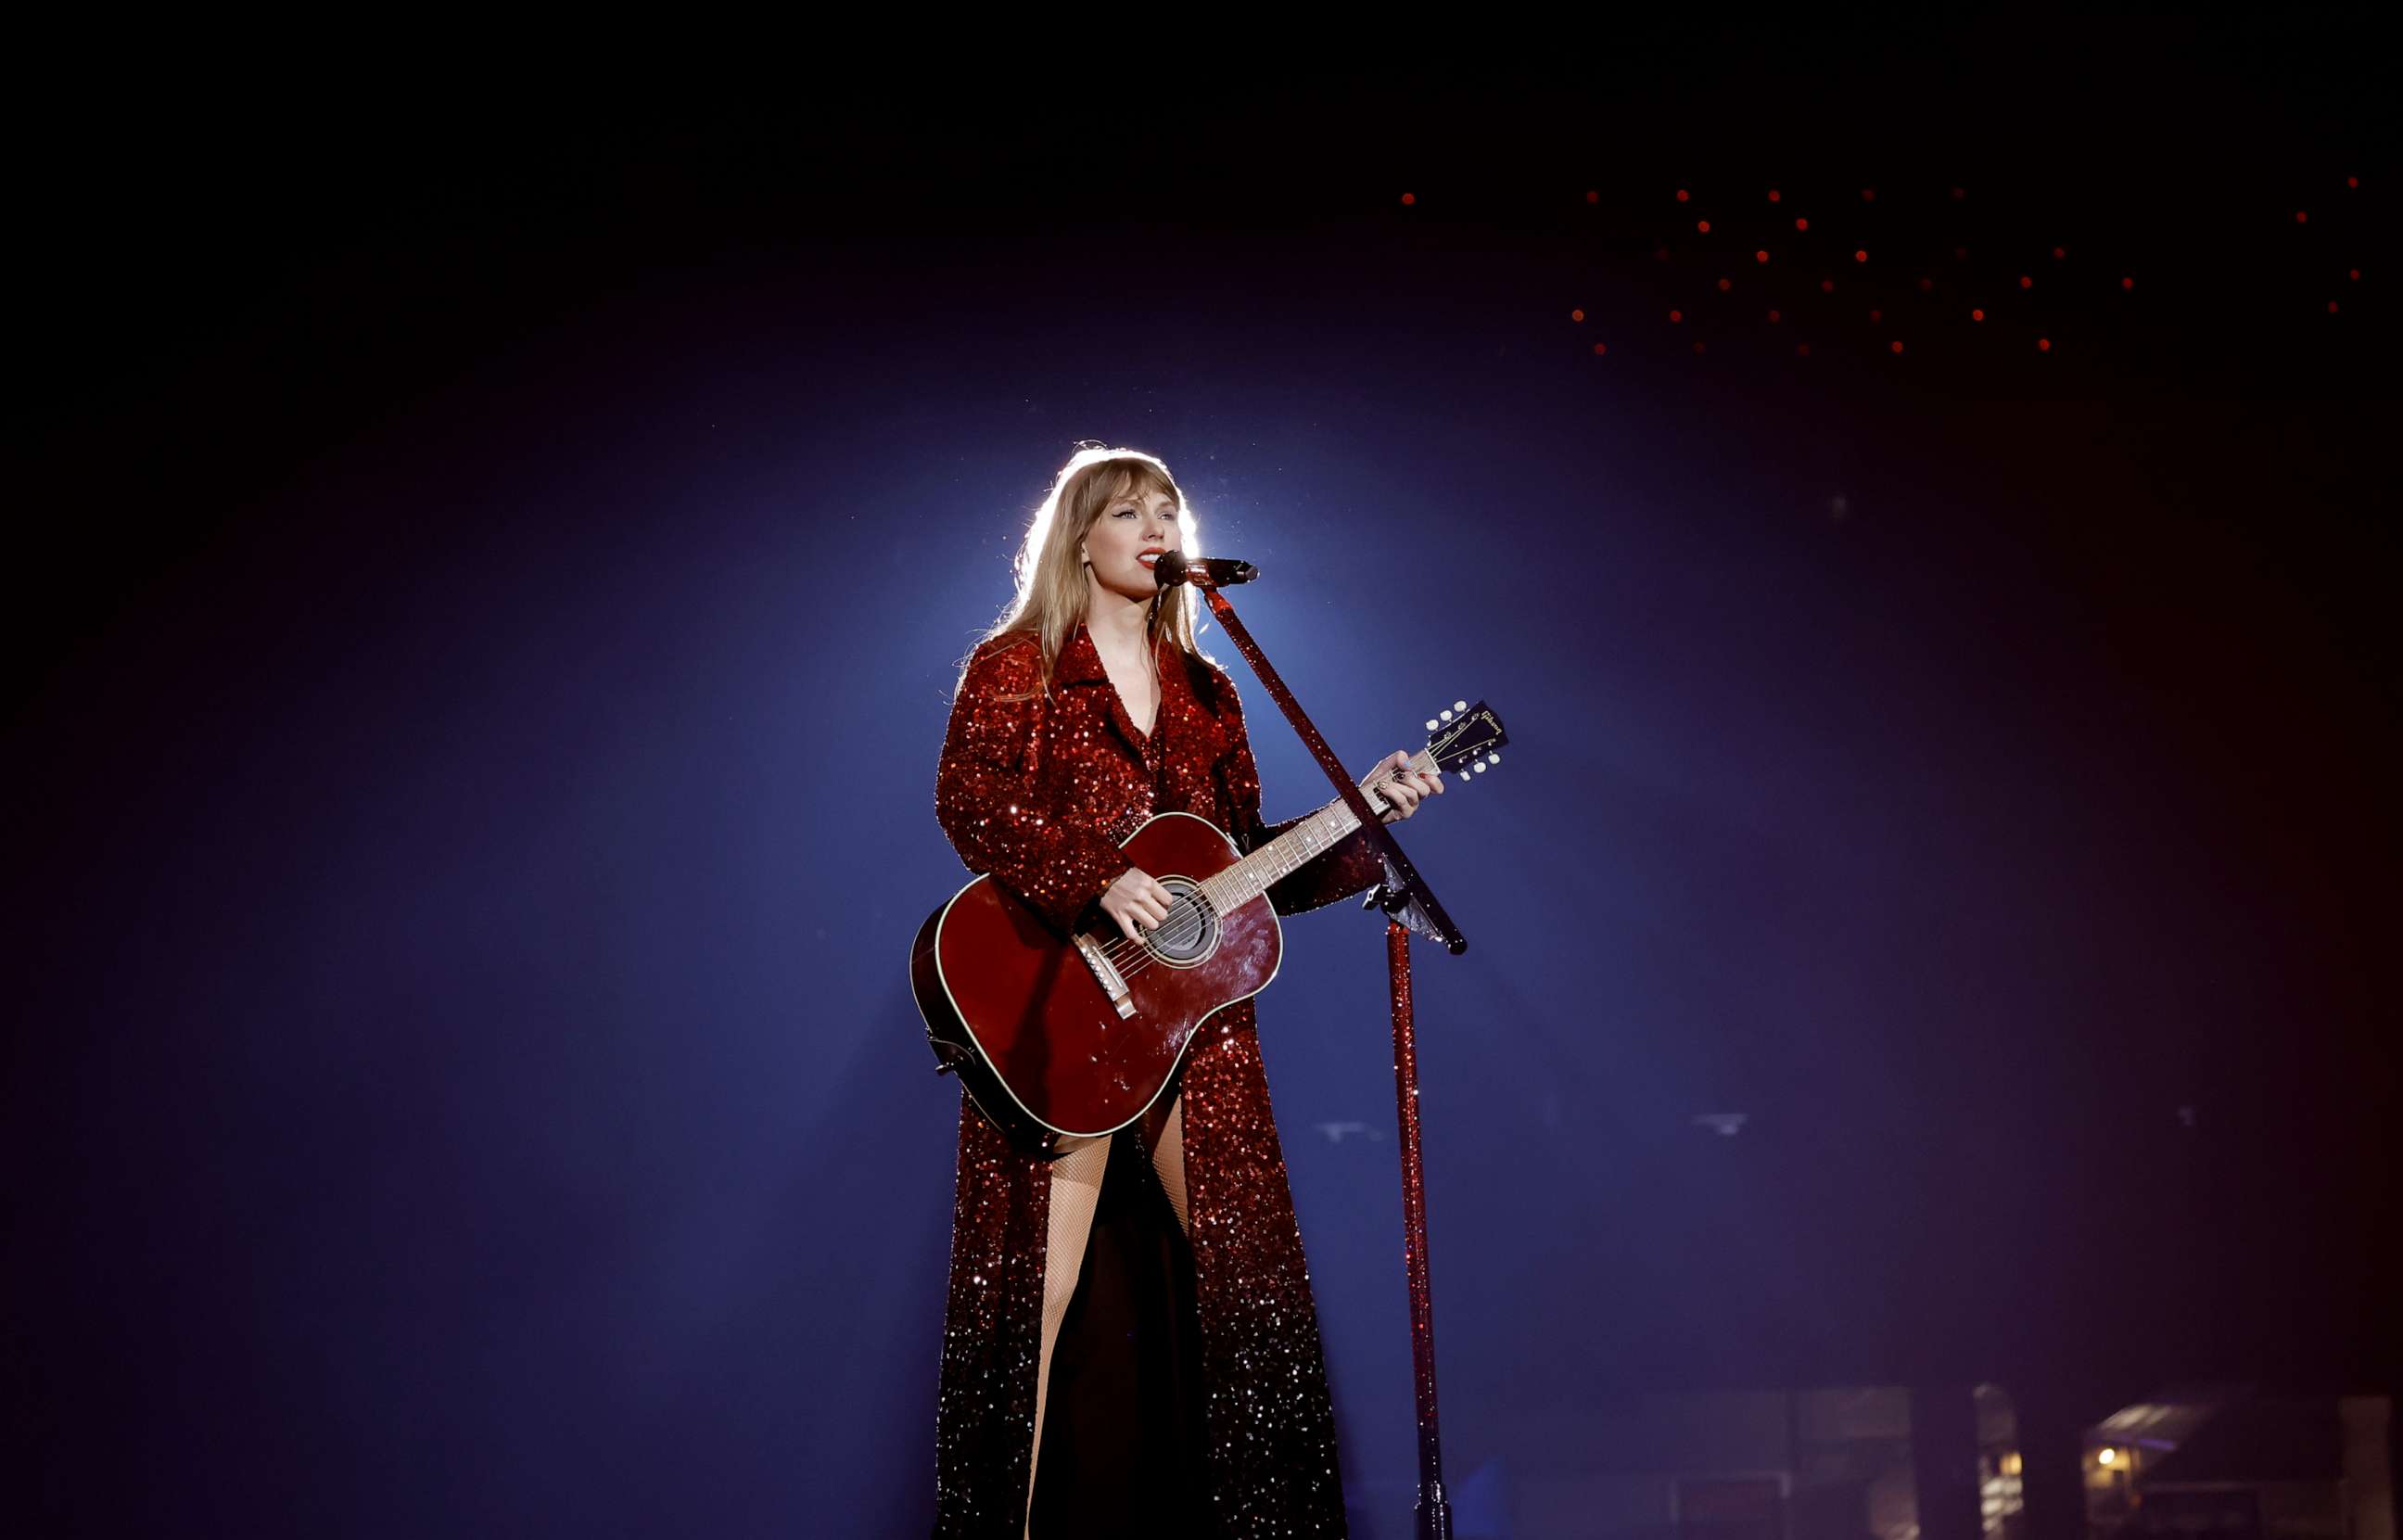 PHOTO: Taylor Swift performs onstage for the opening night of "Taylor Swift | The Eras Tour" at State Farm Stadium on March 17, 2023 in Glendale, Ariz. The city of Glendale was ceremonially renamed to Swift City for March 17-18 in honor of The Eras Tour.